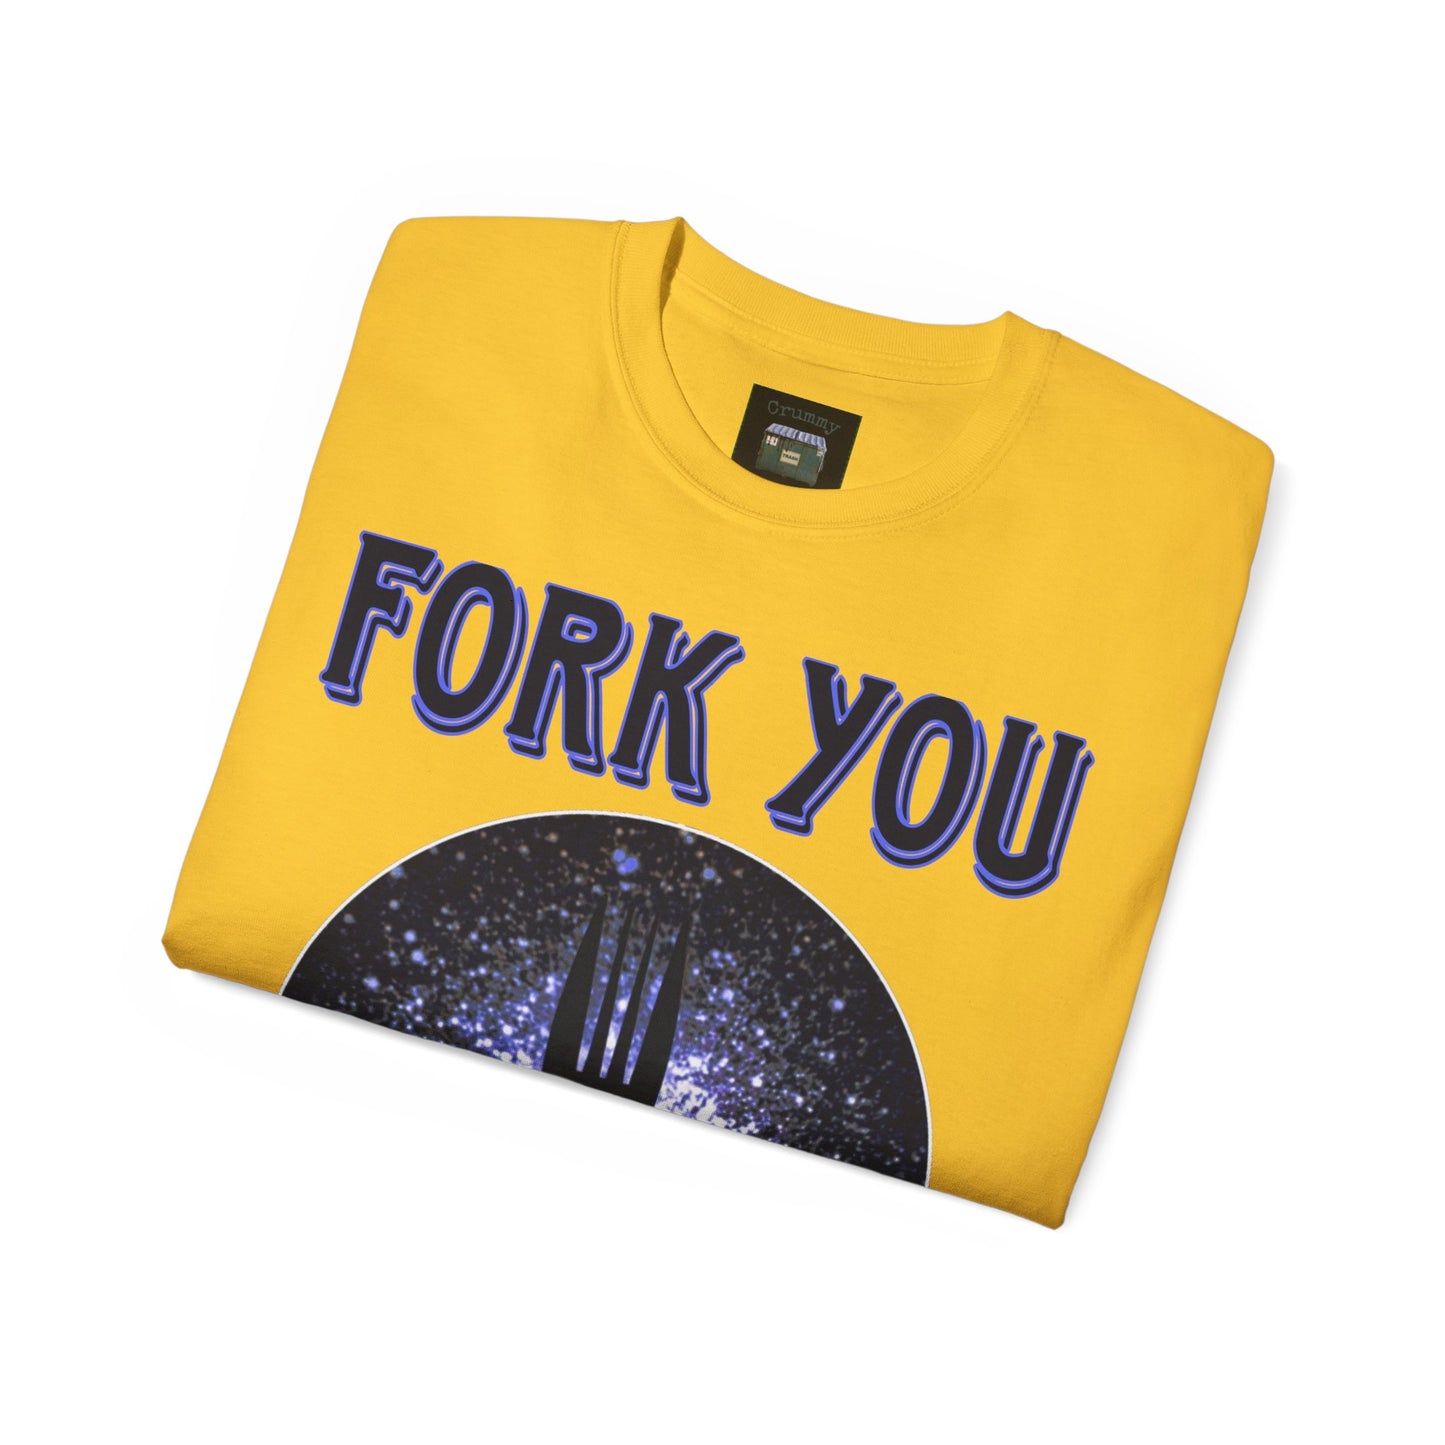 Fork You Unisex Ultra Cotton Tee